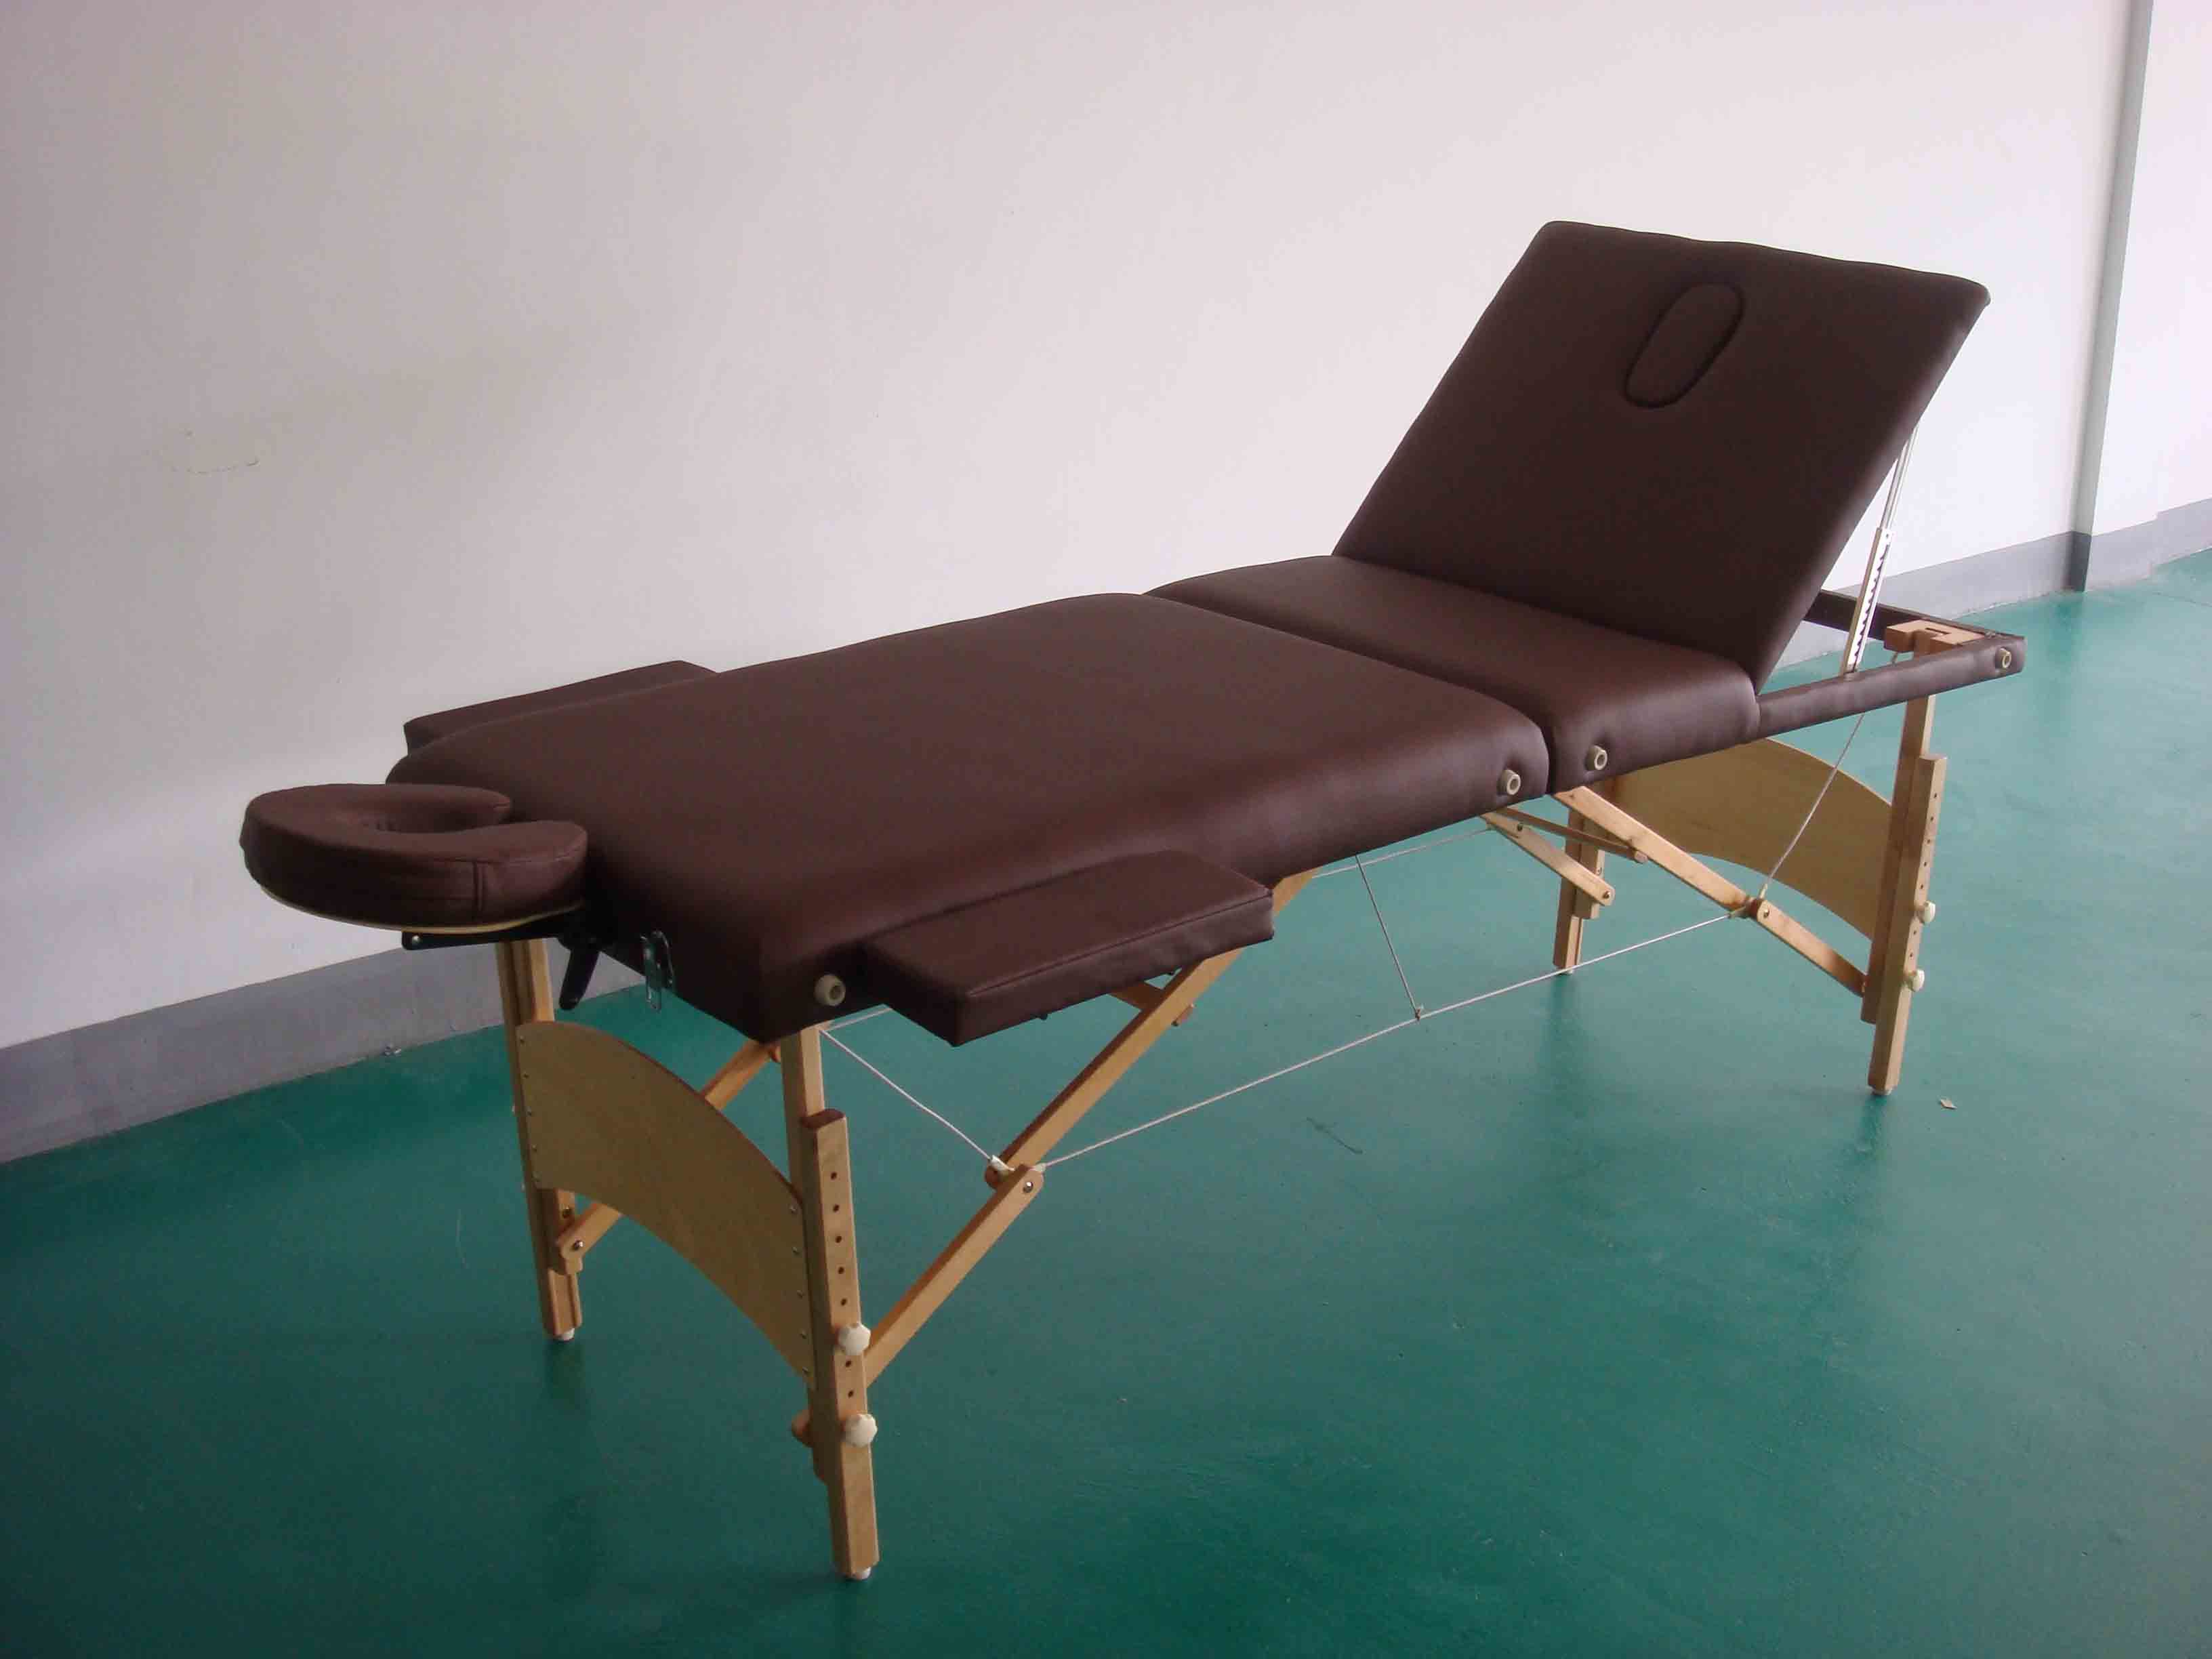 Acupuncture Bed (MT-009A)